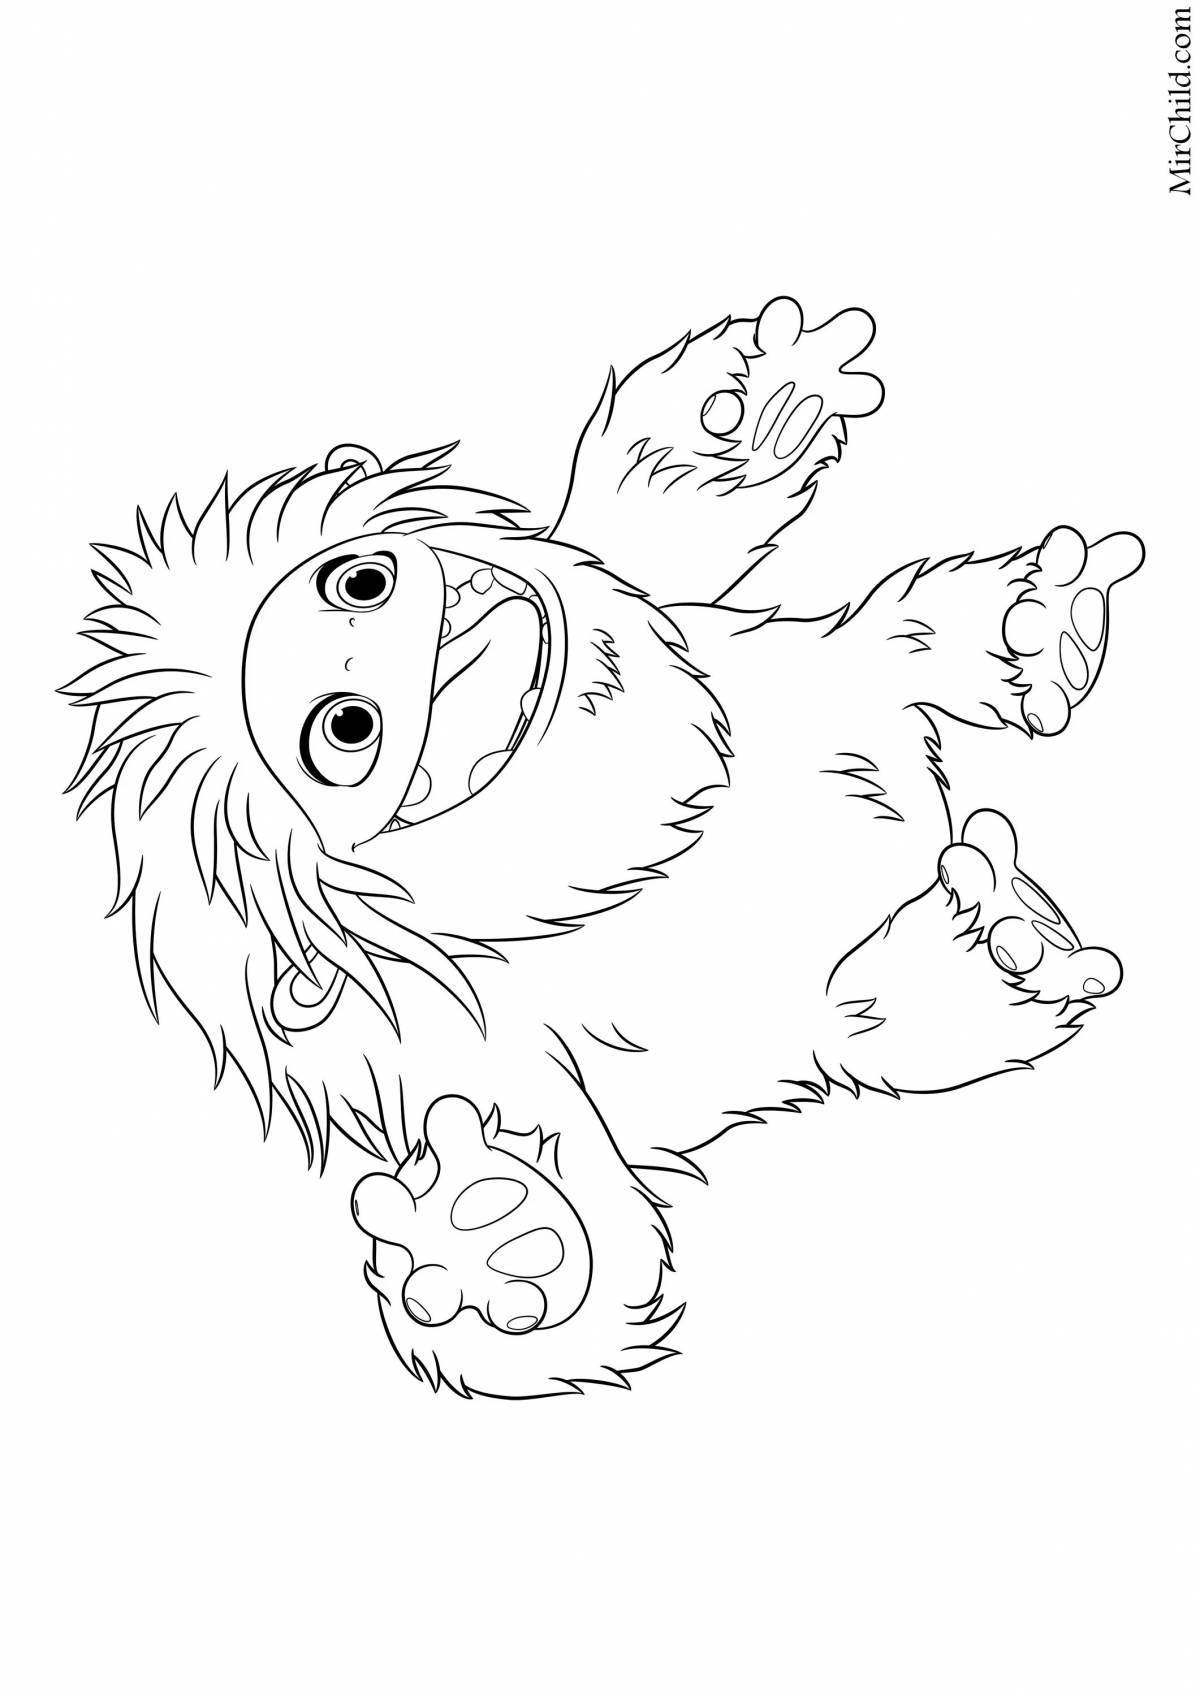 Lovely big foot coloring page